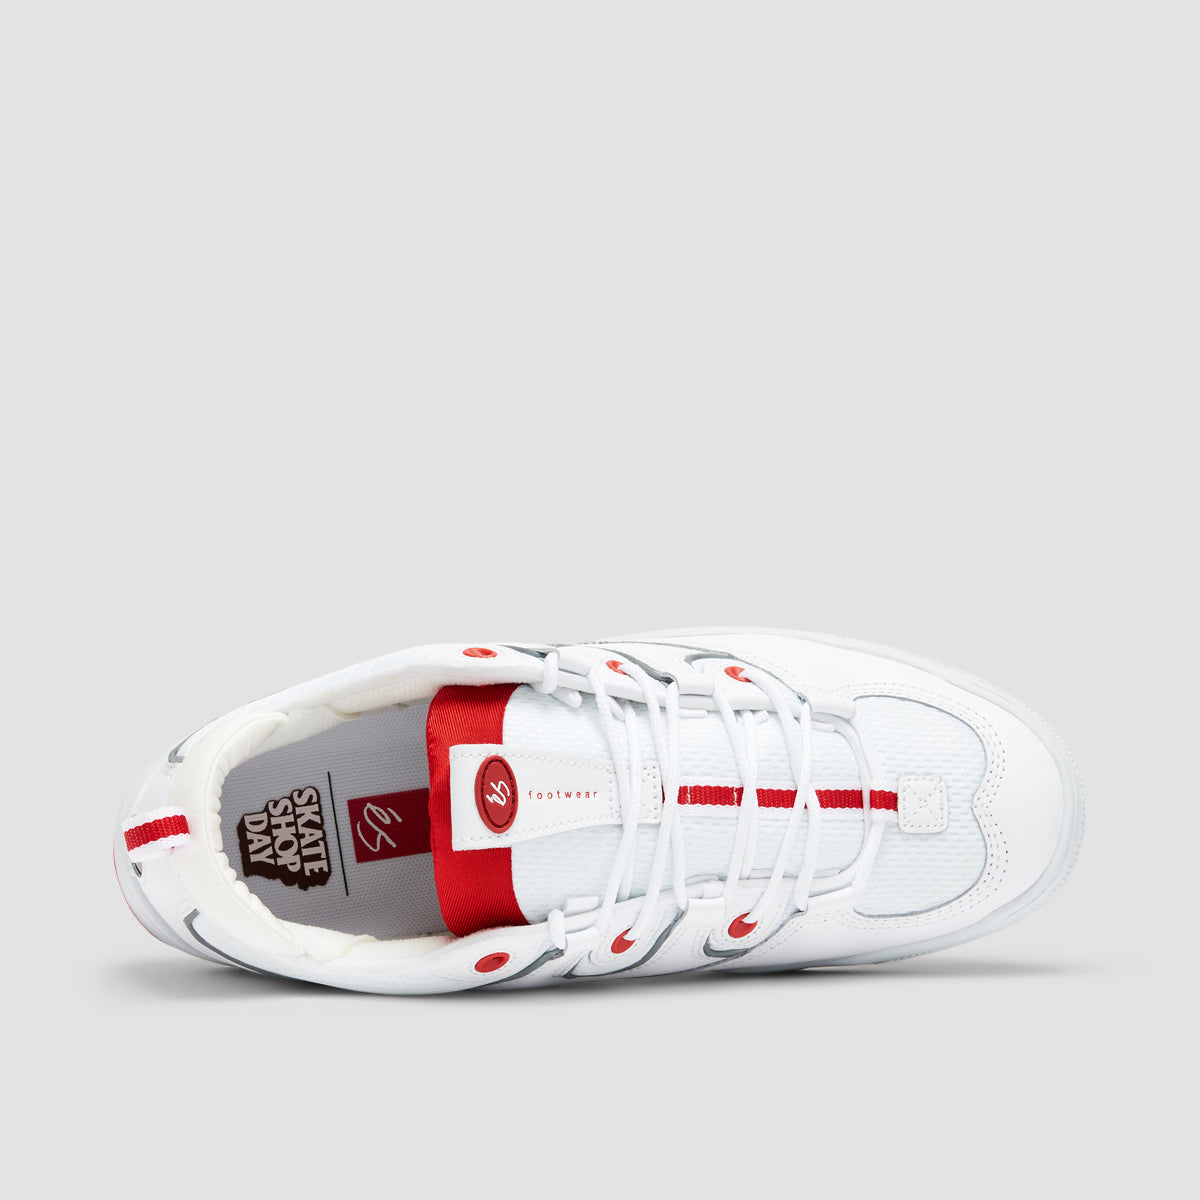 eS Two Nine 8 Shoes - White/Red